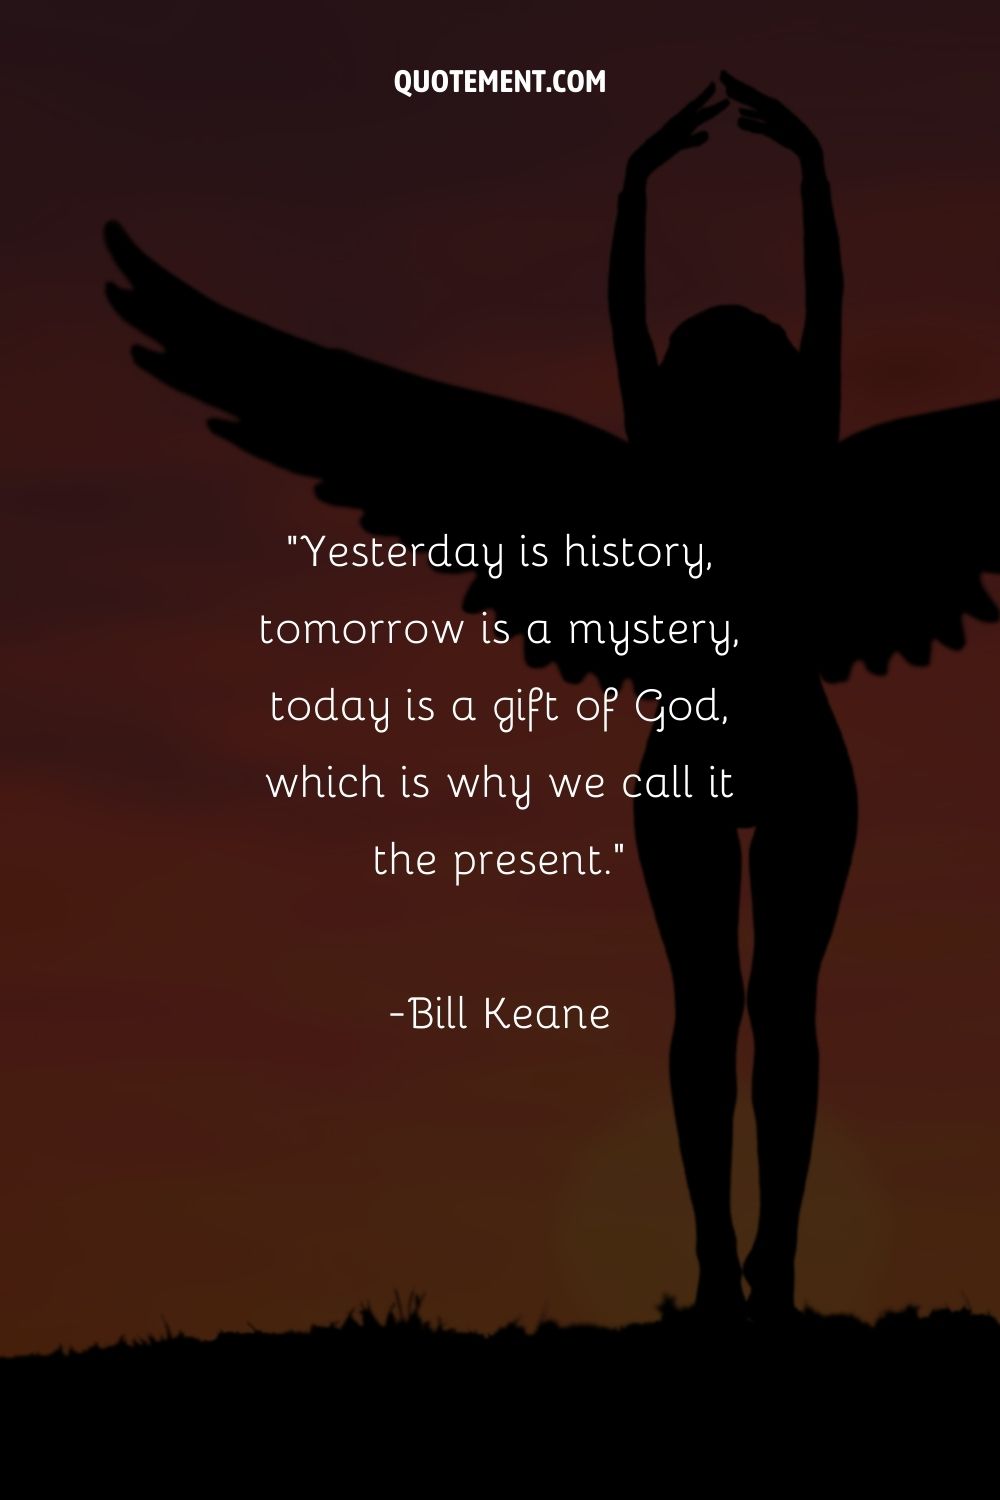 Yesterday is history, tomorrow is a mystery, today is a gift of God